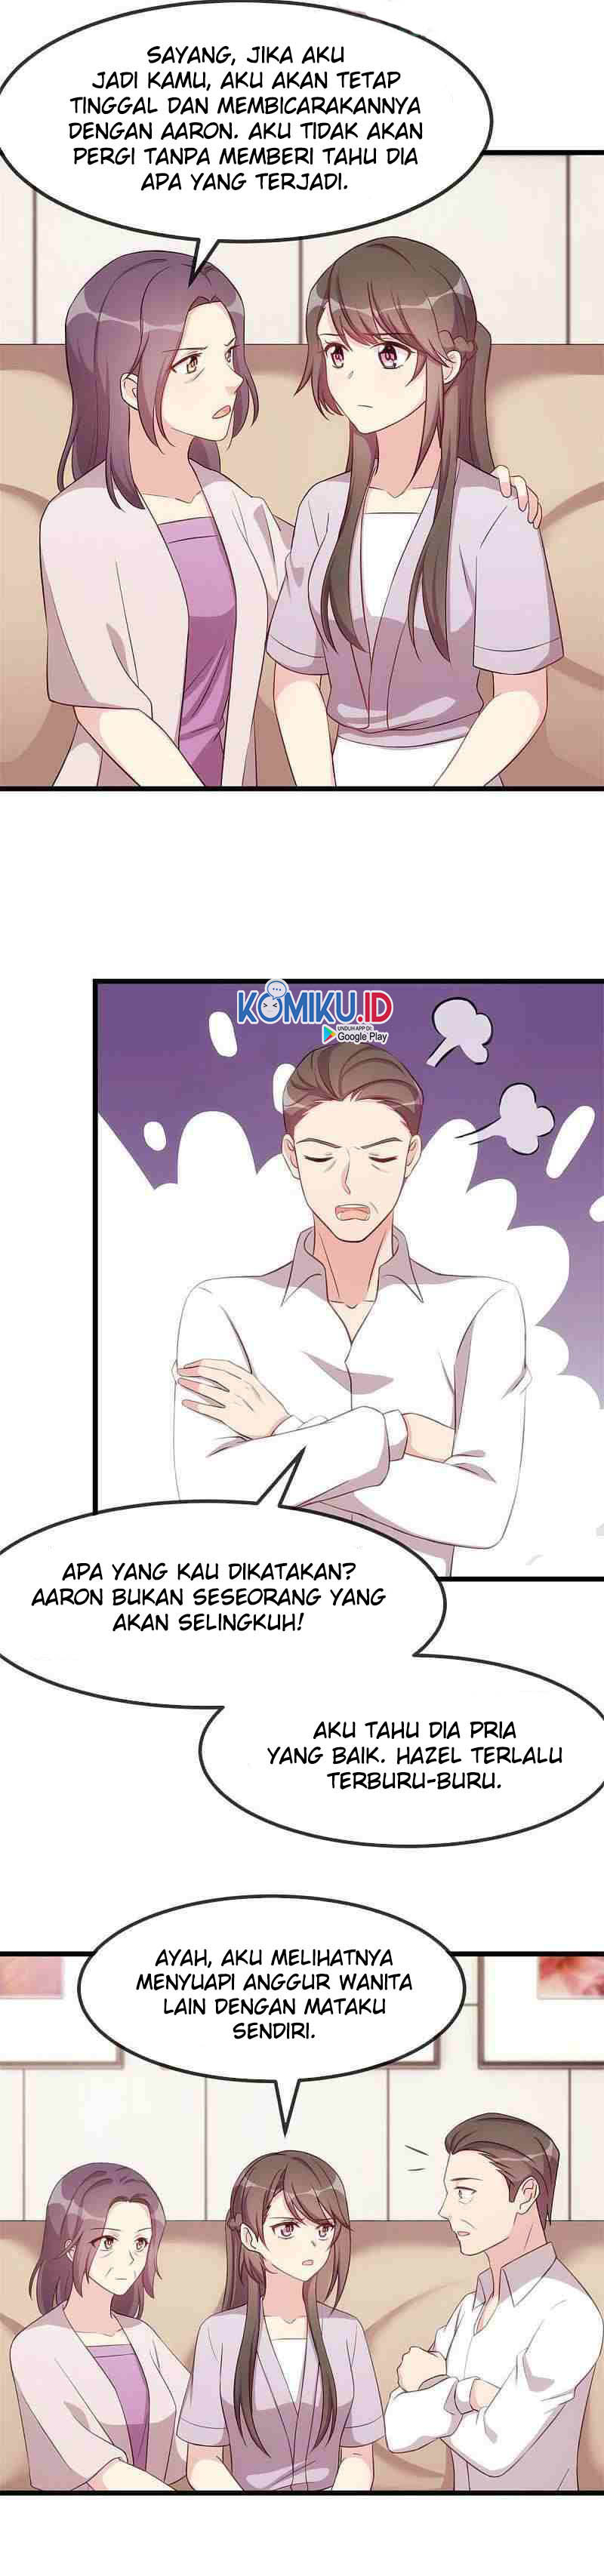 CEO’s Sudden Proposal Chapter 338 3